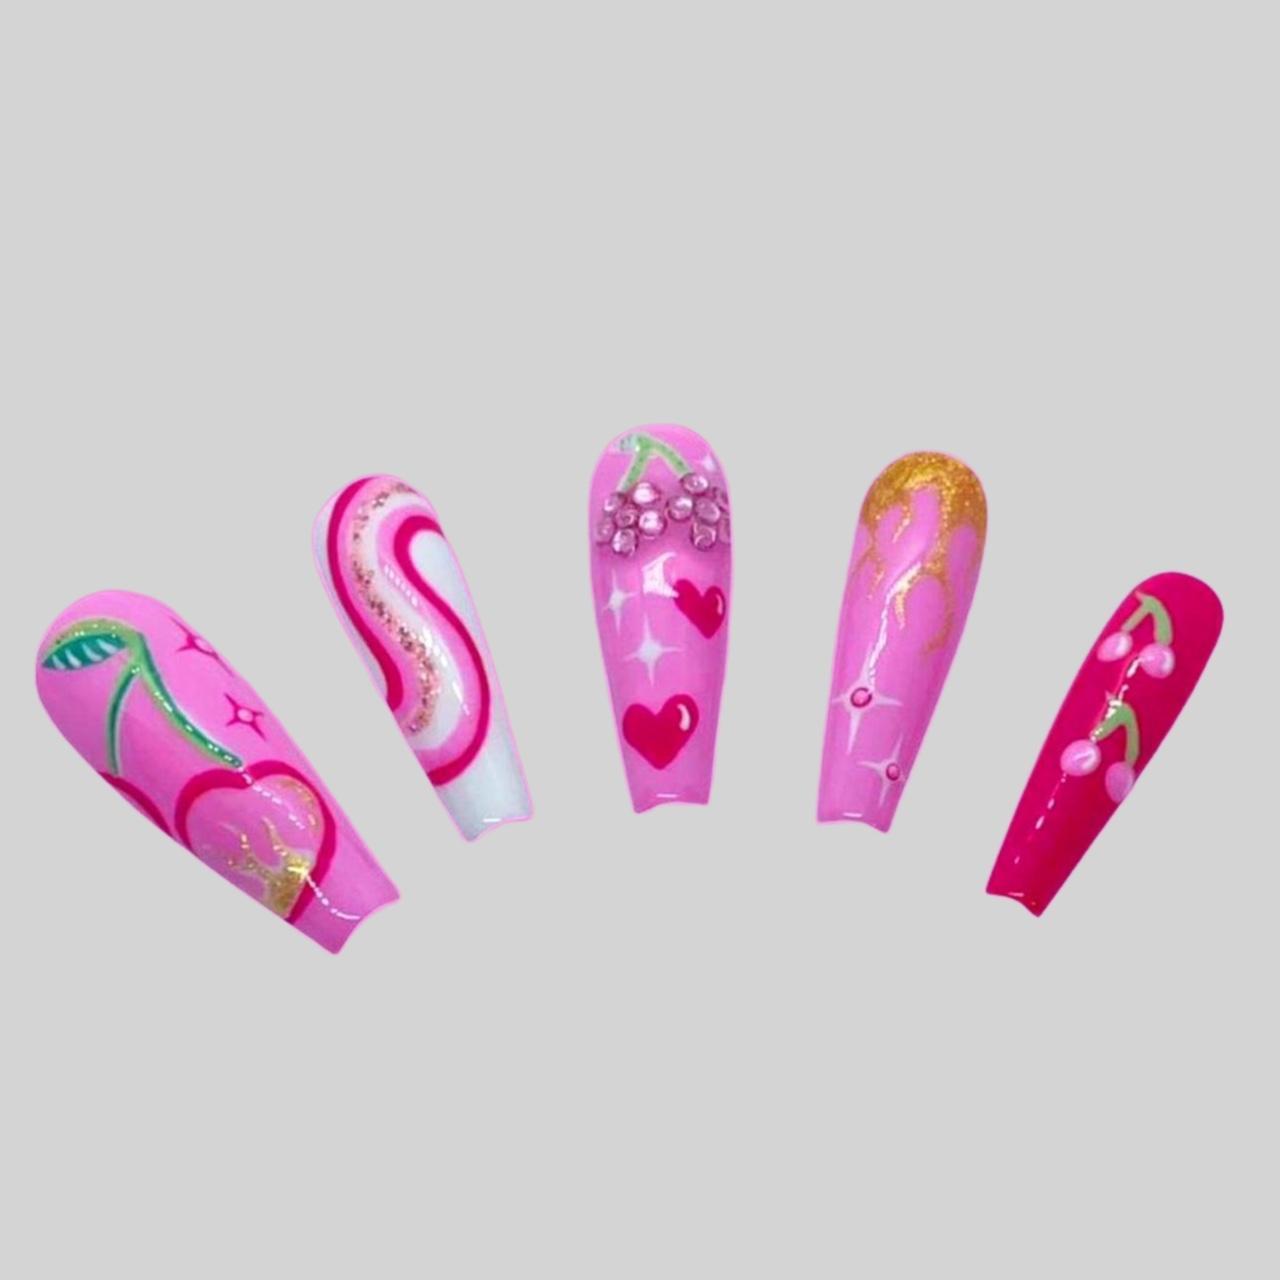 SUPPER BEAUTY Nail Art Kit for Girls with Artificial Nails Set of 3 Pcs  Assorted Packs with 12 Pcs Extra Colored Nails pack of 1 - Price in India,  Buy SUPPER BEAUTY